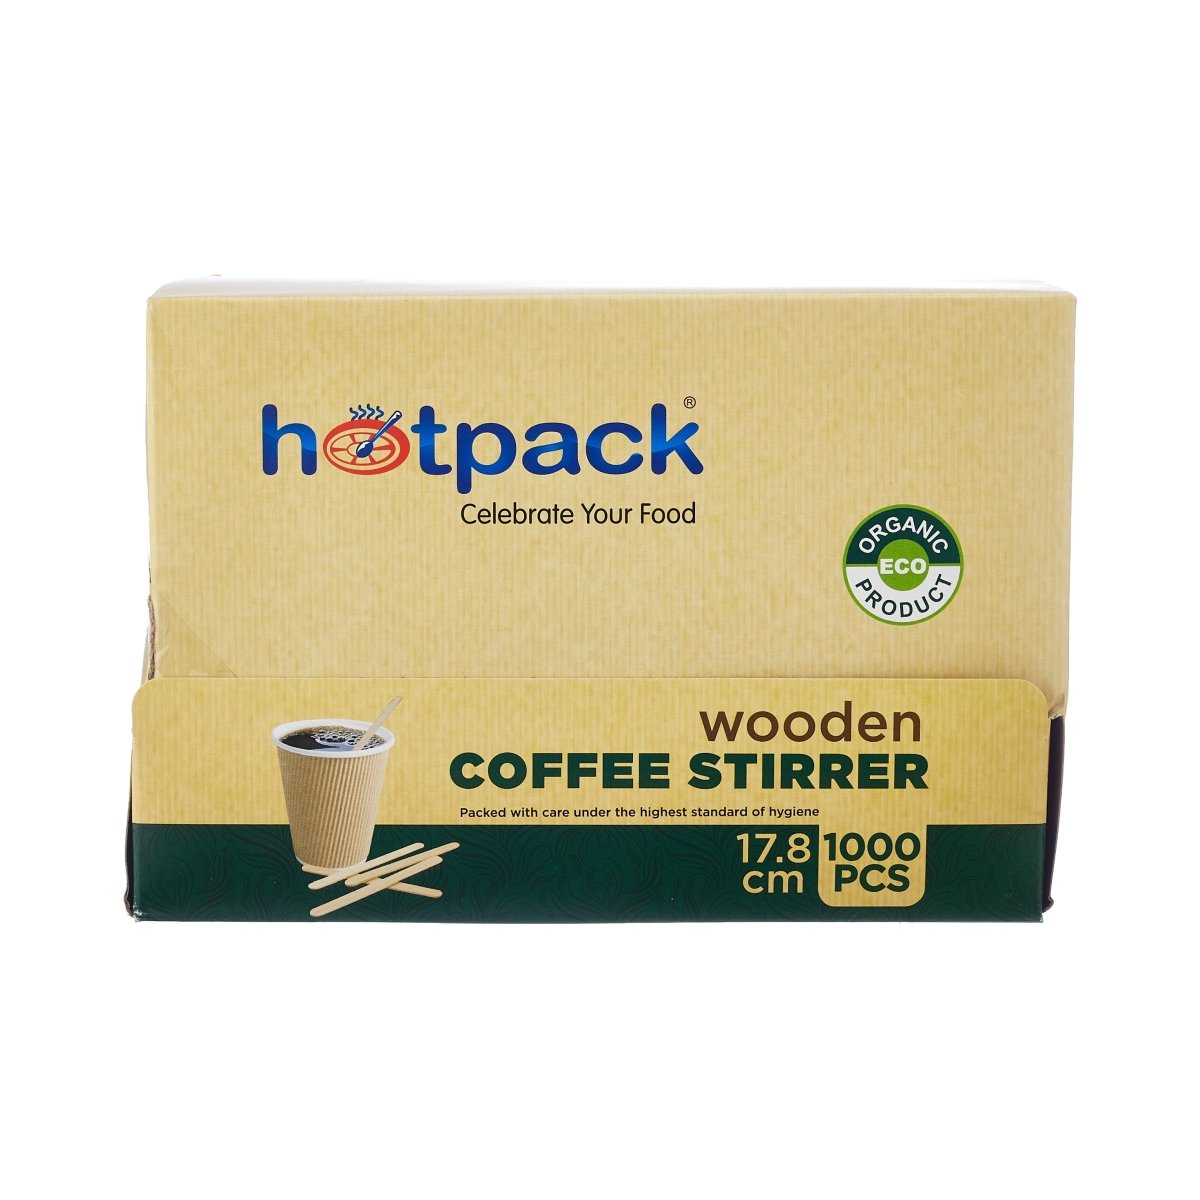 Disposable Wooden Coffee Stirrer - hotpackwebstore.com - Wooden Coffee Stirrer